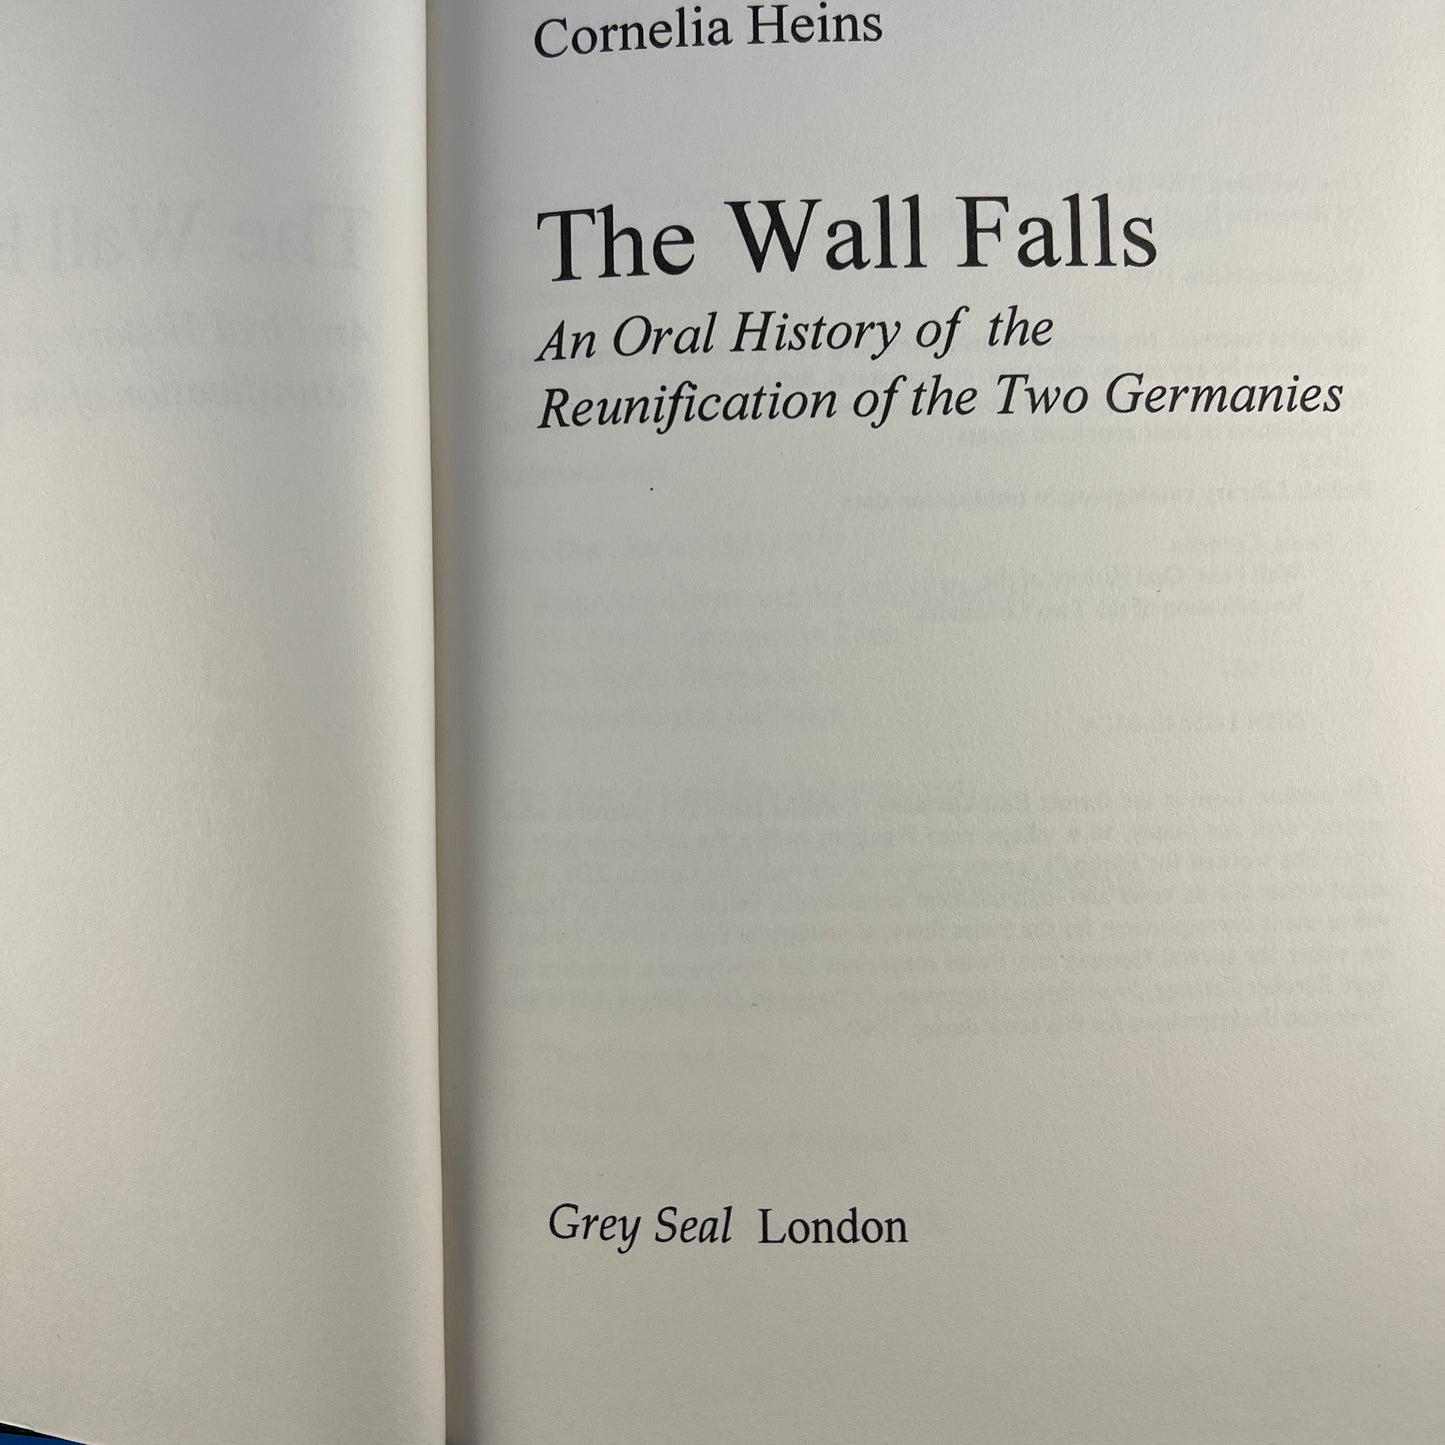 The Wall Falls: An Oral History of the Reunification of the Two Germanies